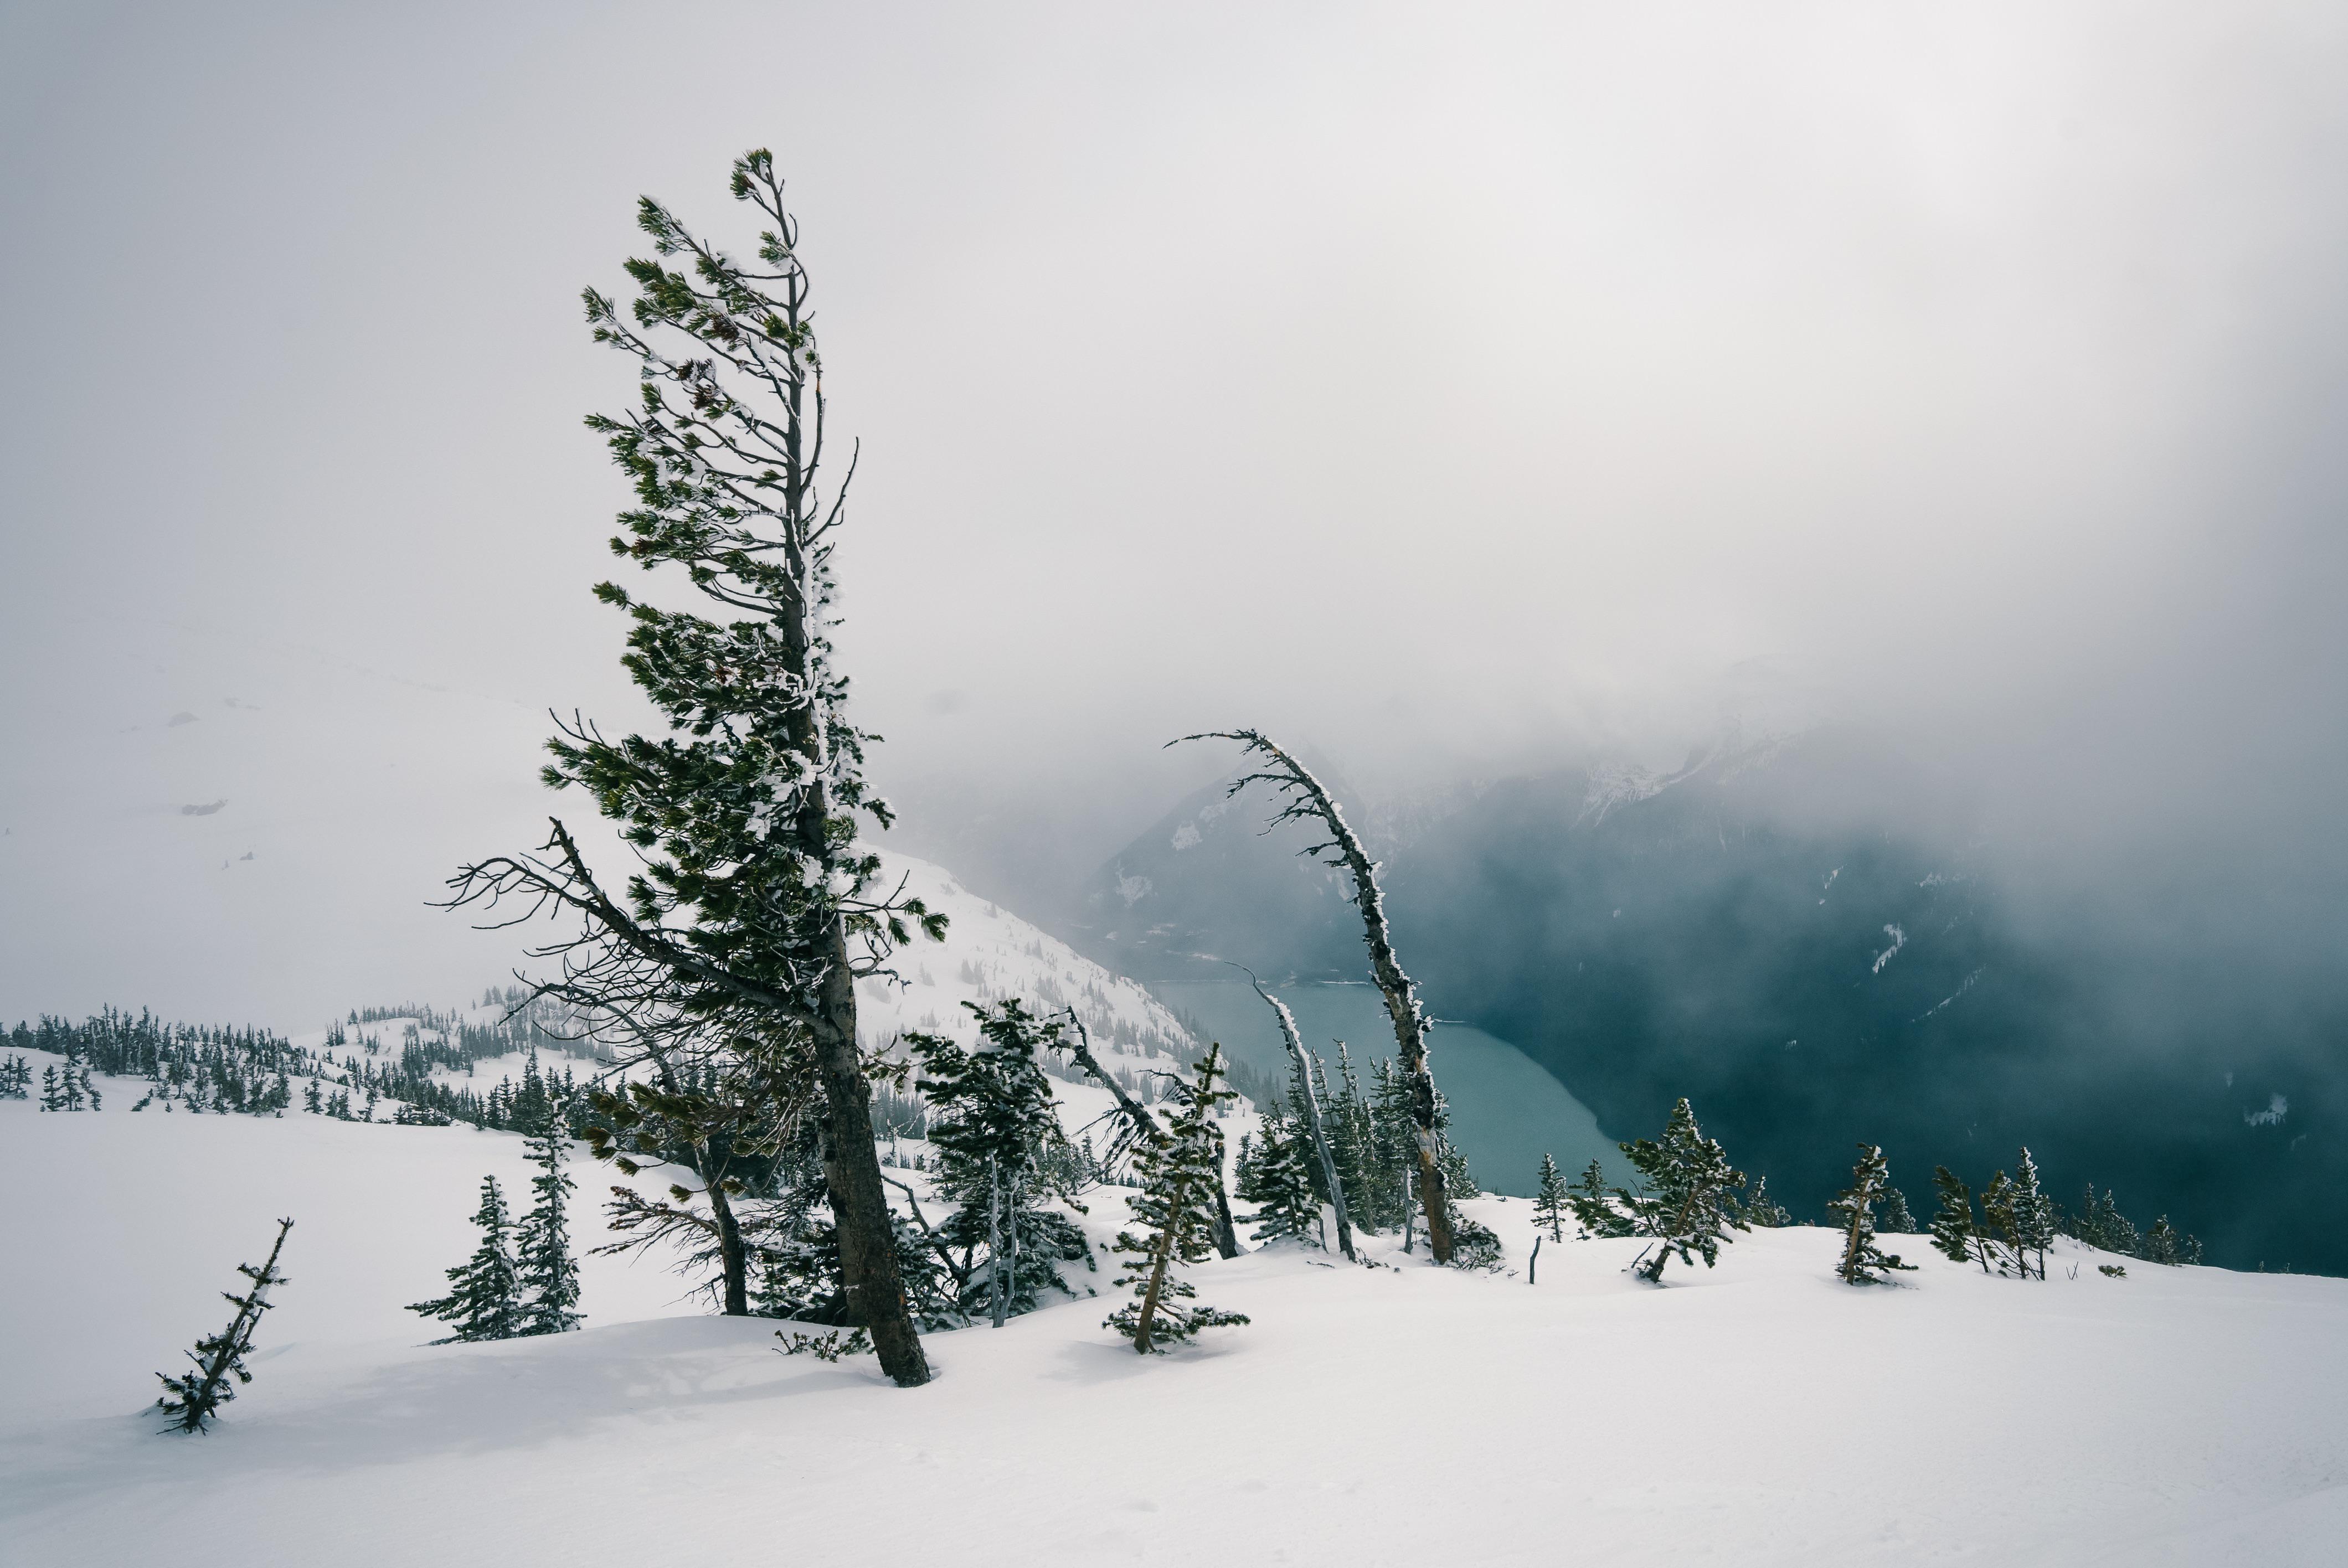 General 4240x2832 landscape nature Canada British Columbia fog mist clouds winter snow trees outdoors mountain view